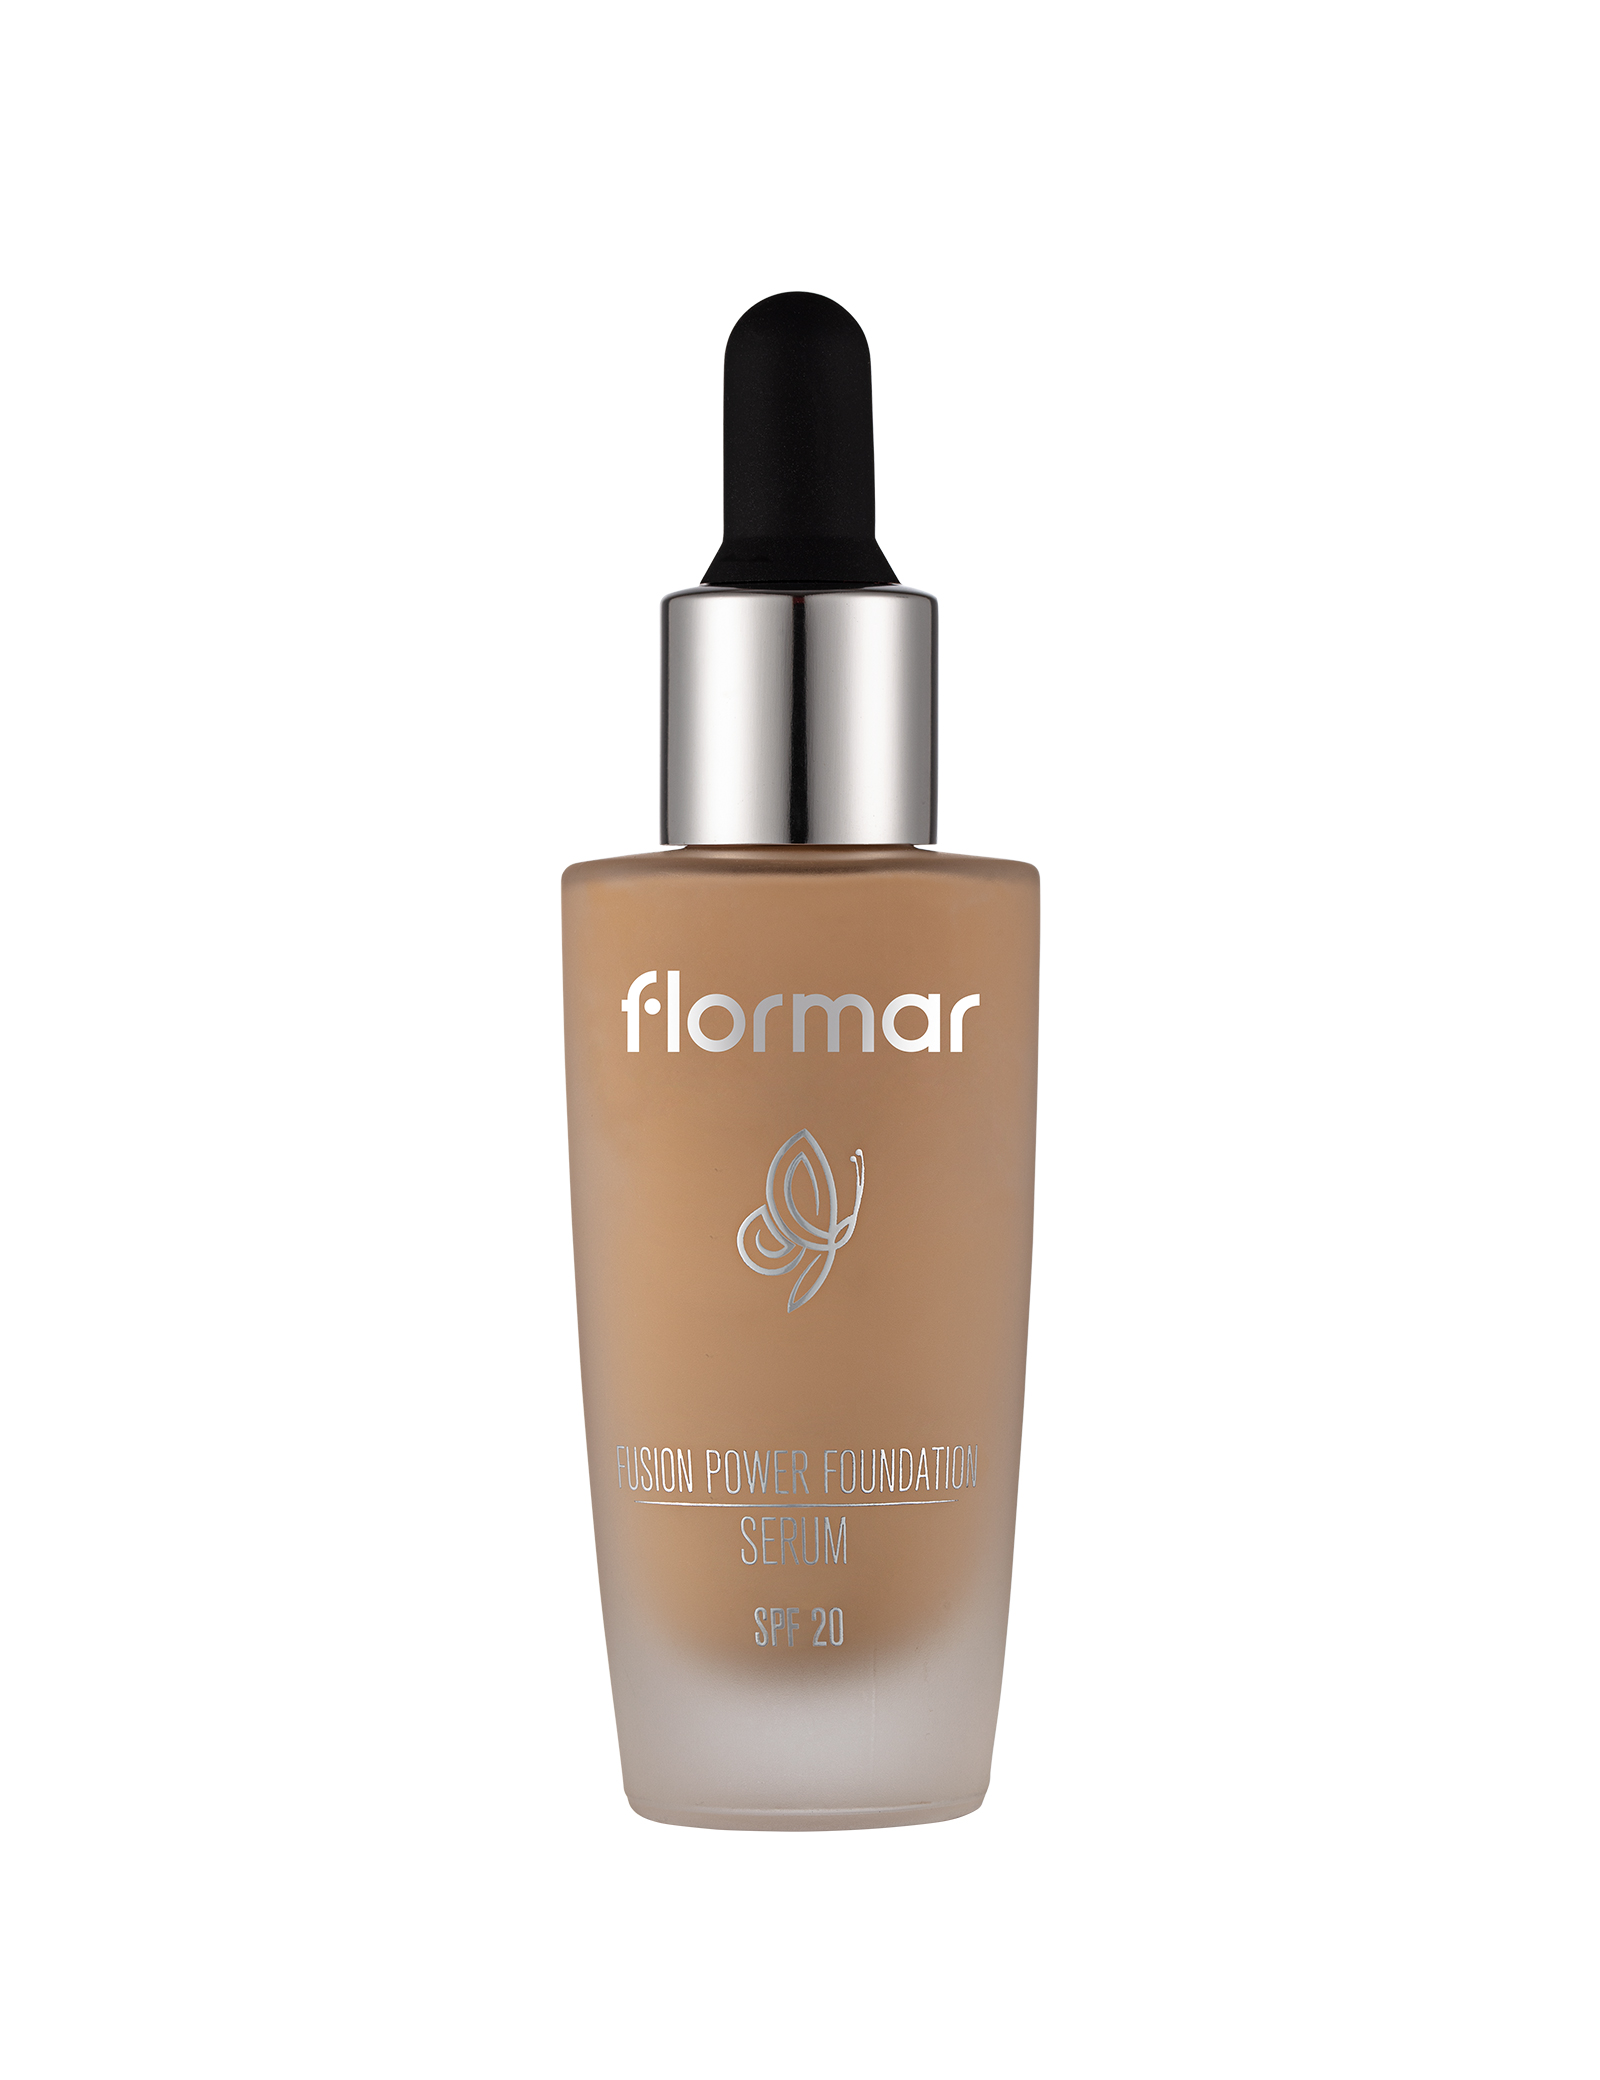 Flormar Perfect Coverage Foundation - 107 Natural Ivory : Buy